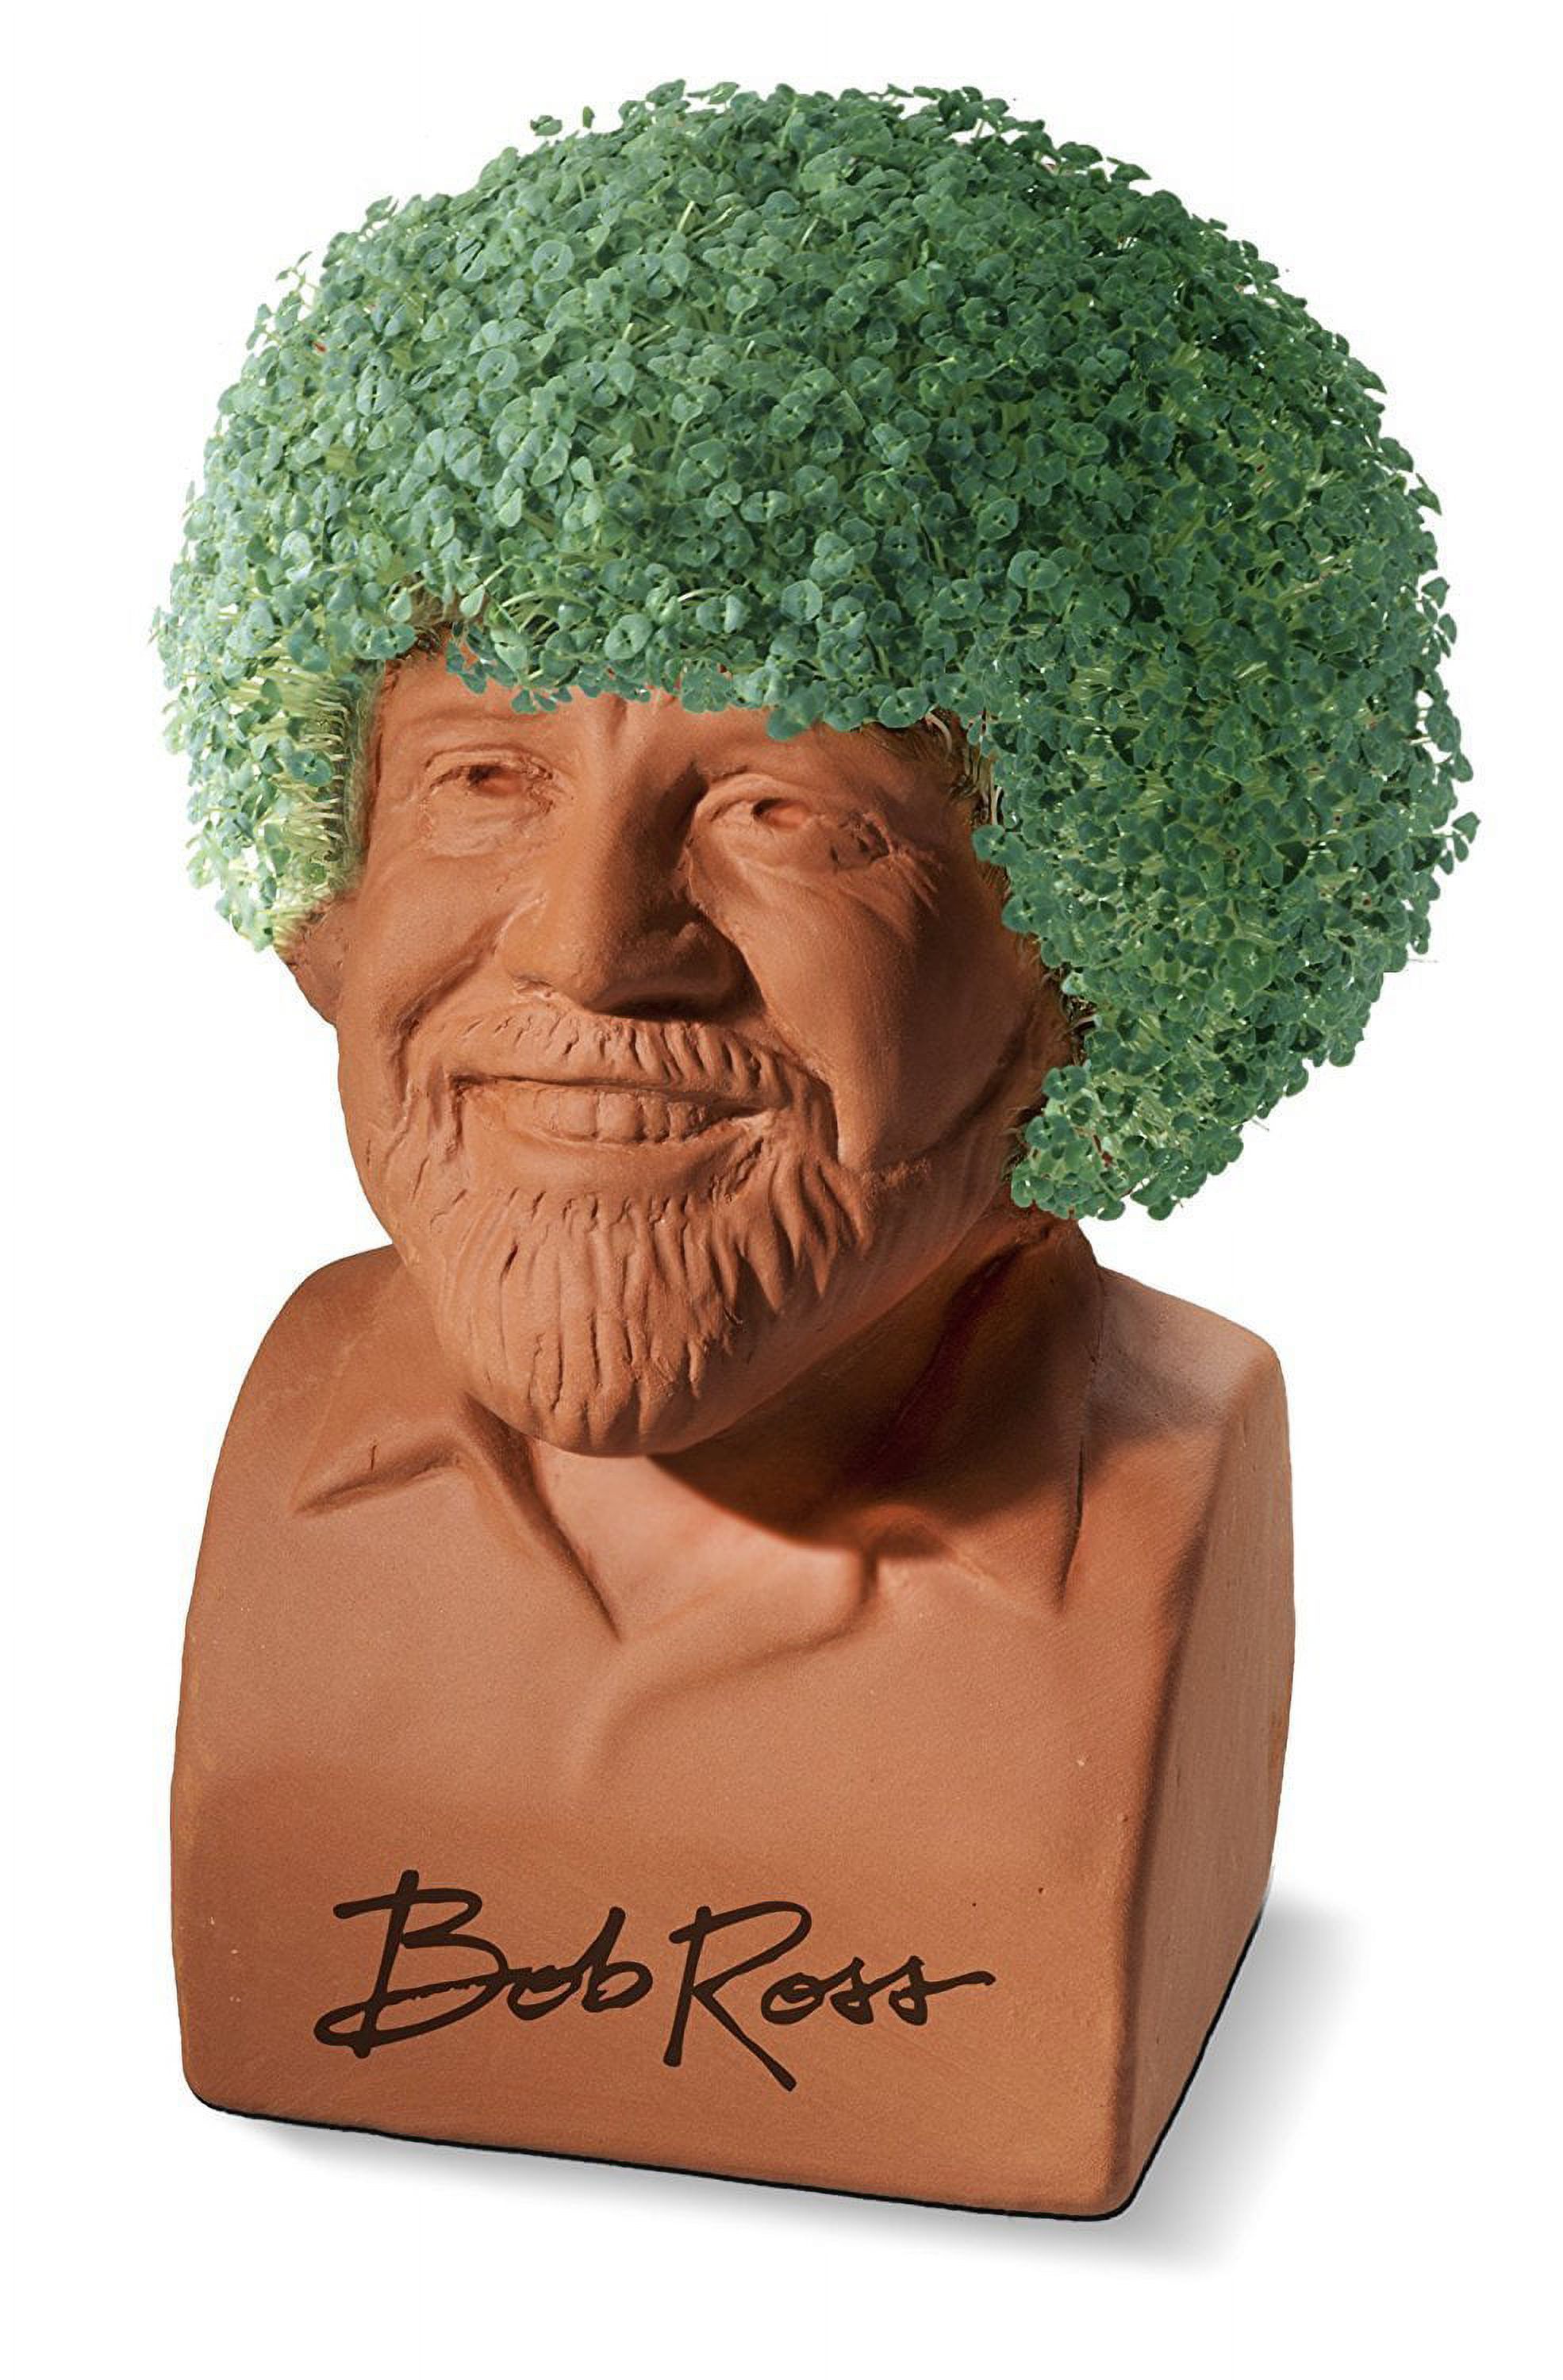 Chia Pet Bob Ross (The Joy of Painting) - Decorative Pot Easy to Do Fun to Grow Chia Seeds Novelty Gift - image 4 of 5